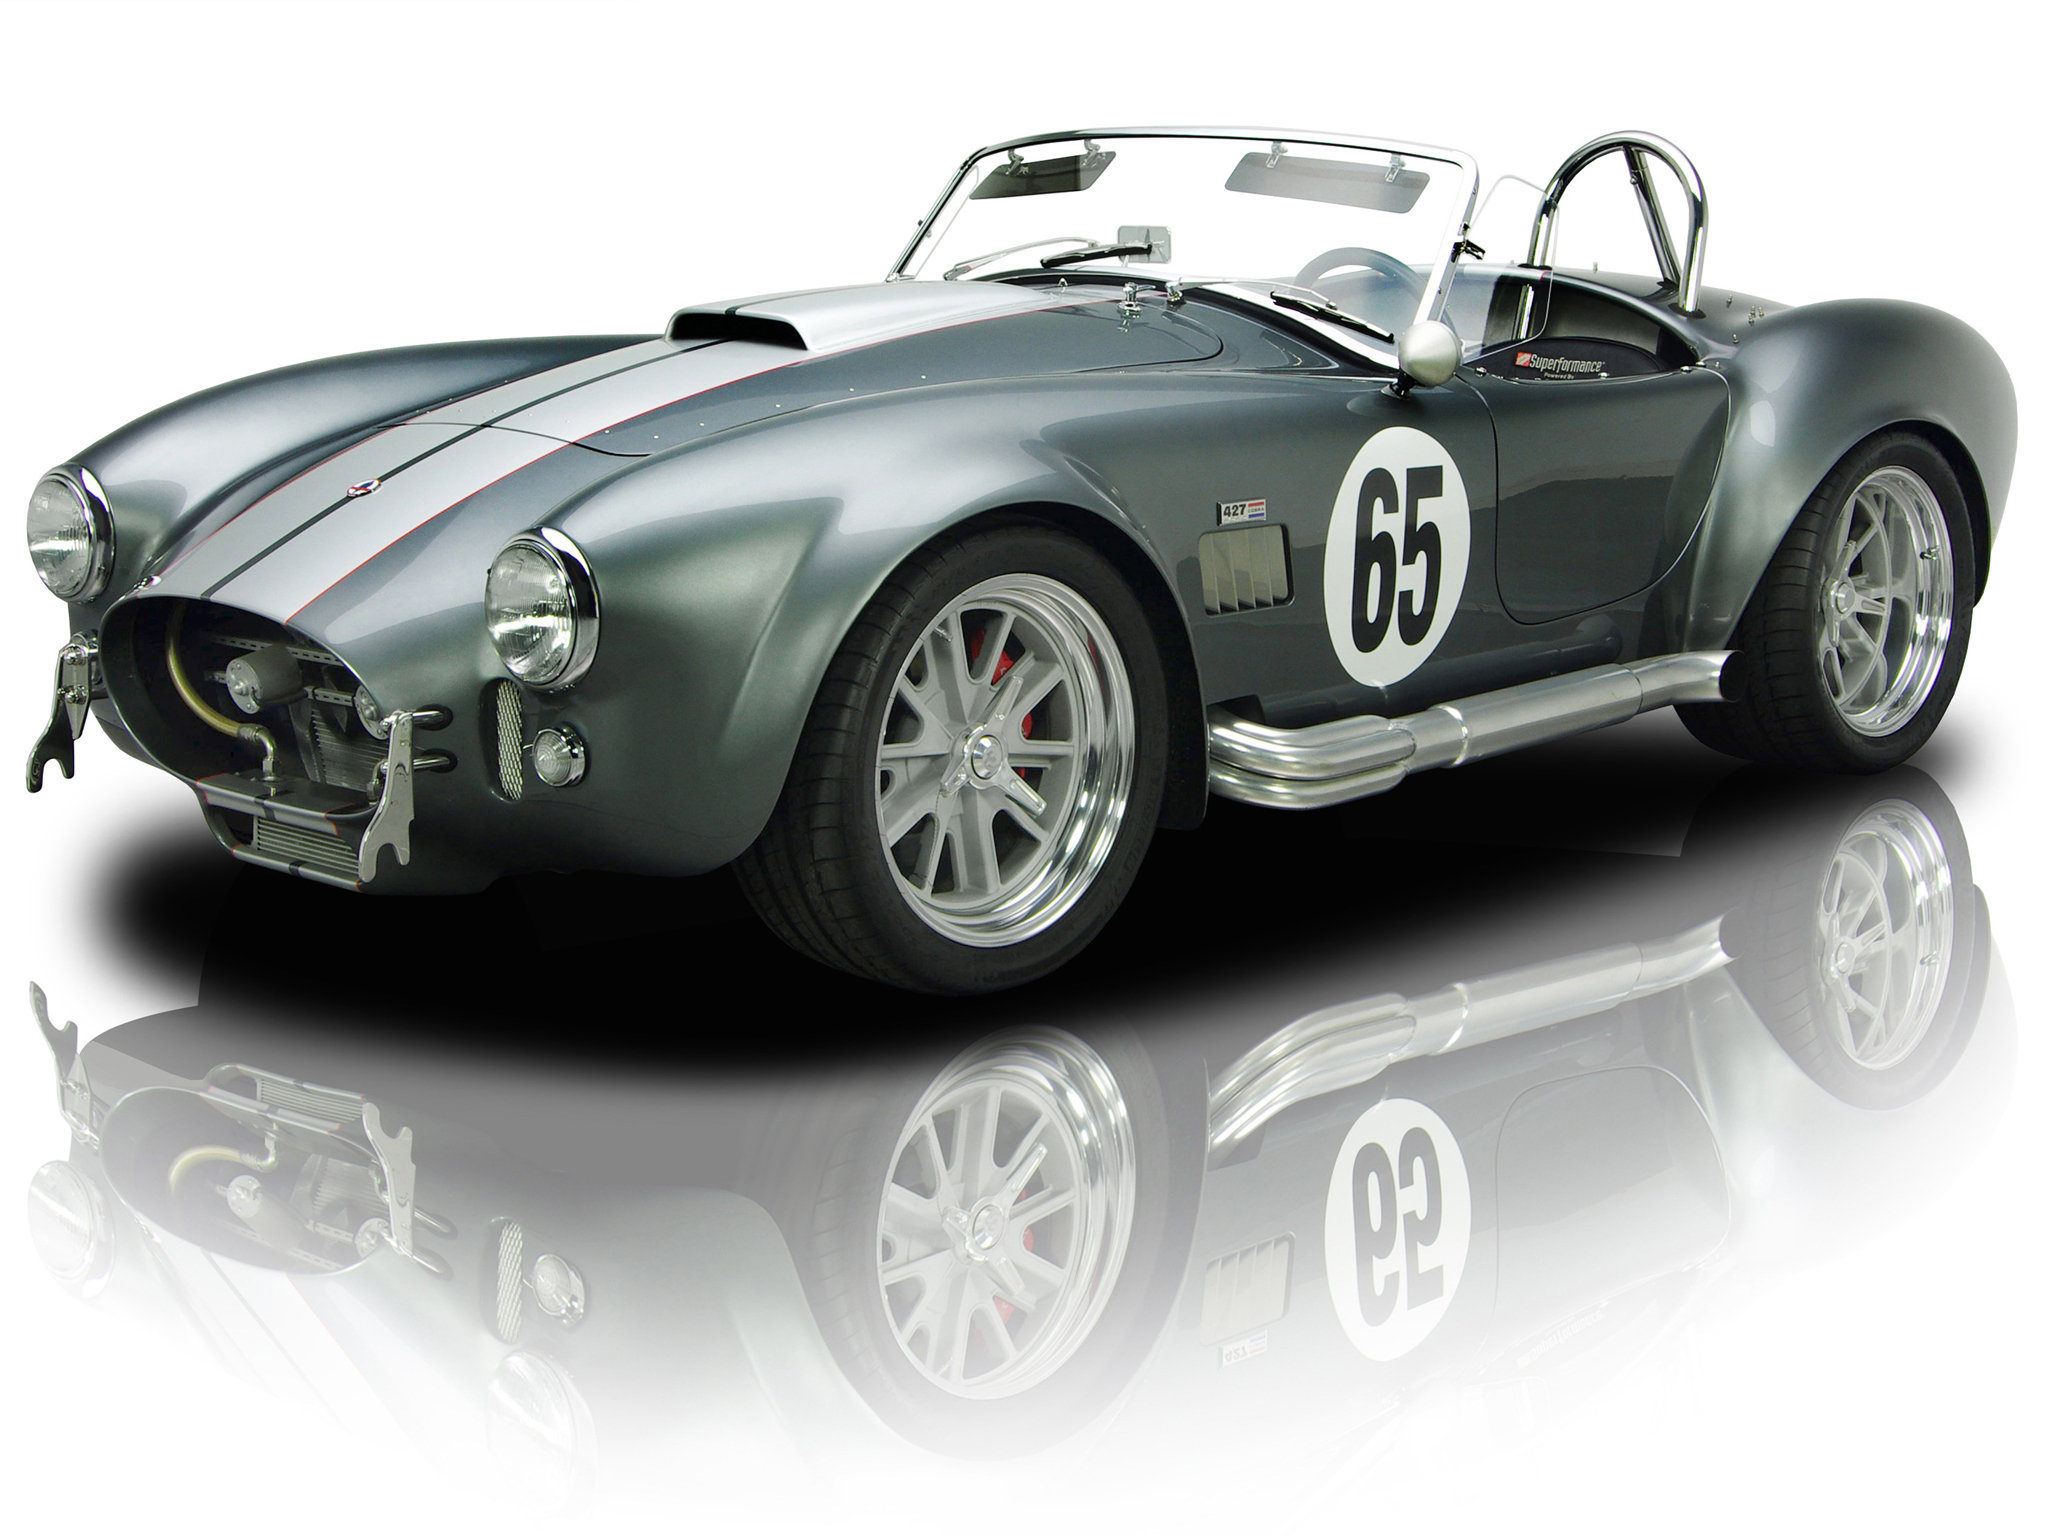 2009, Ac, Shelby, Cobra, Replica, Hot, Rod, Rods, Muscle Wallpaper